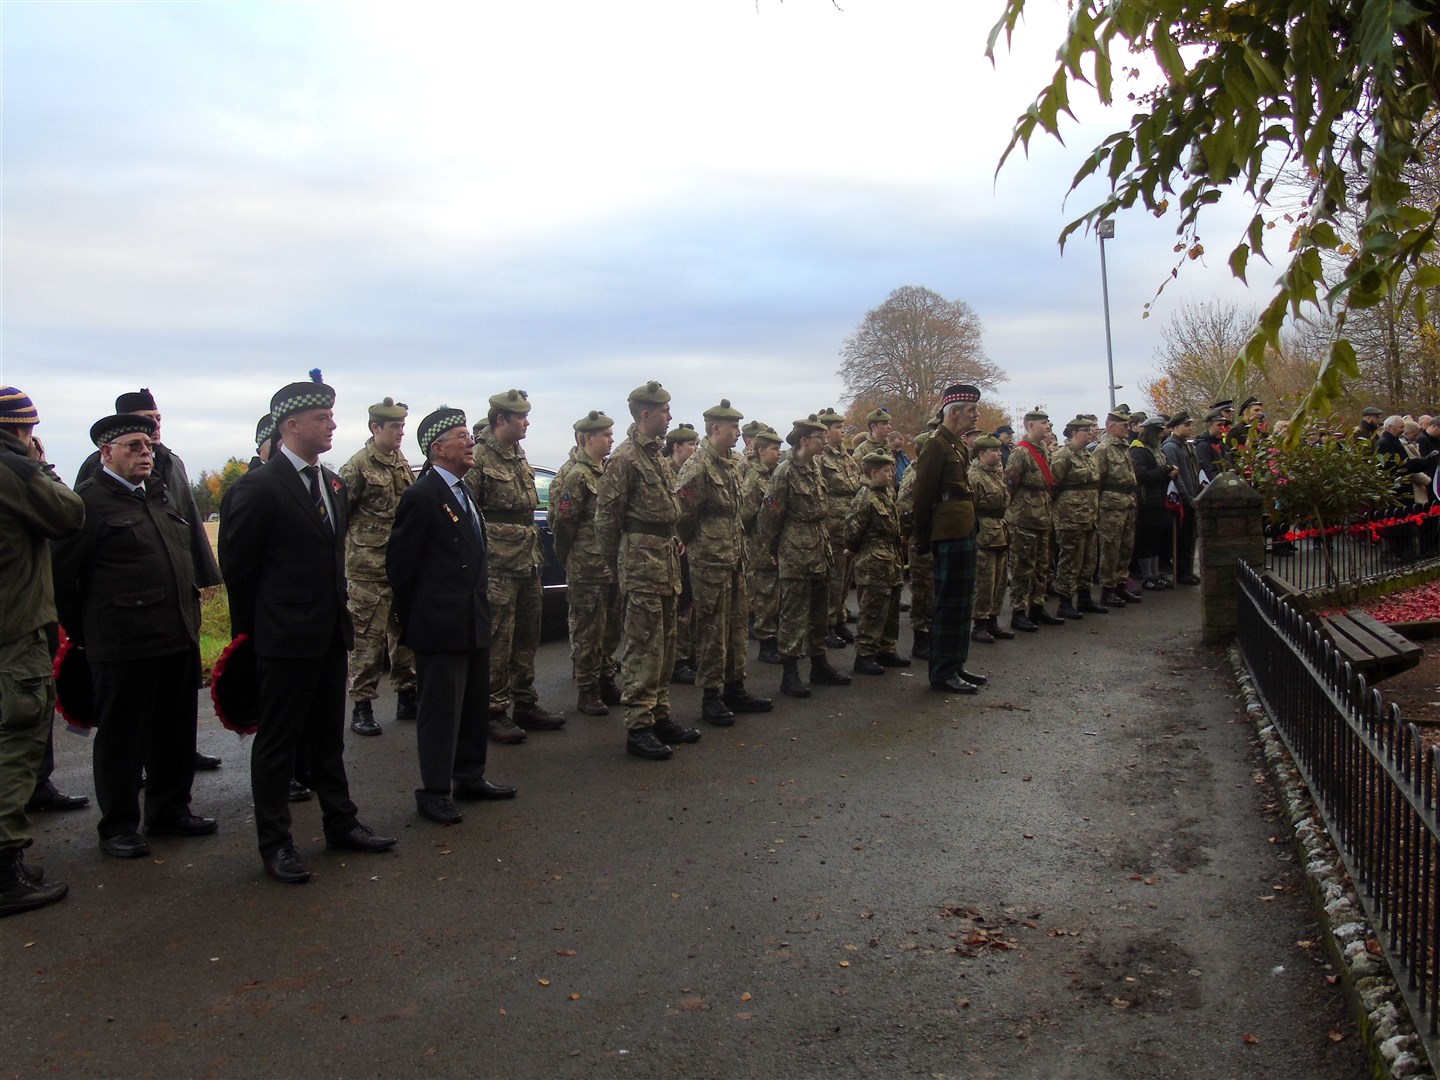 Cadets gather to pay respect to fallen Polish service personnel in Invergordon.